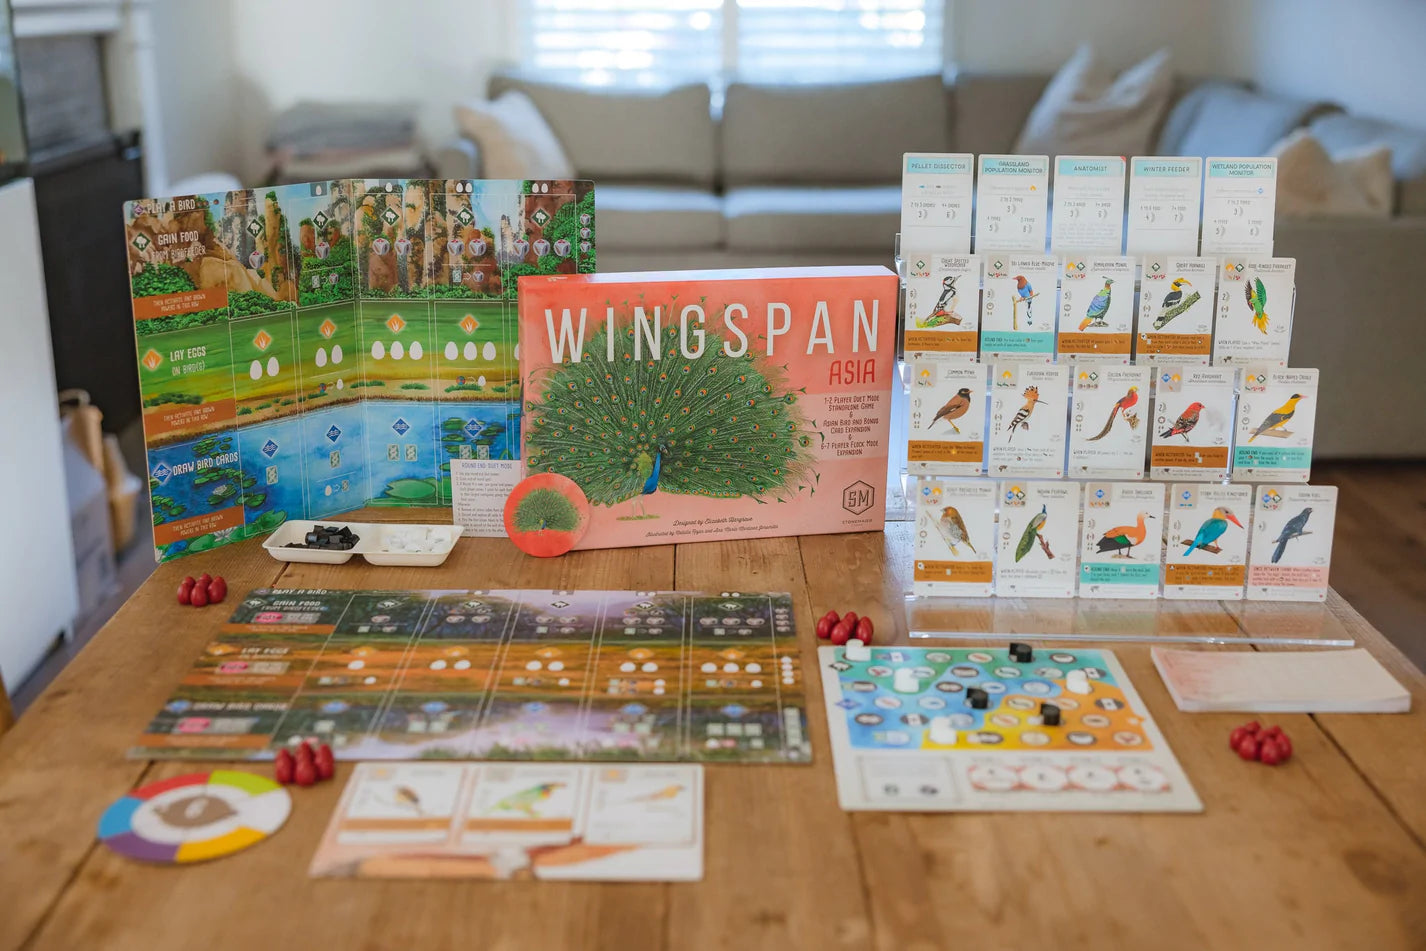 Wingspan Asia Expansion + Standalone